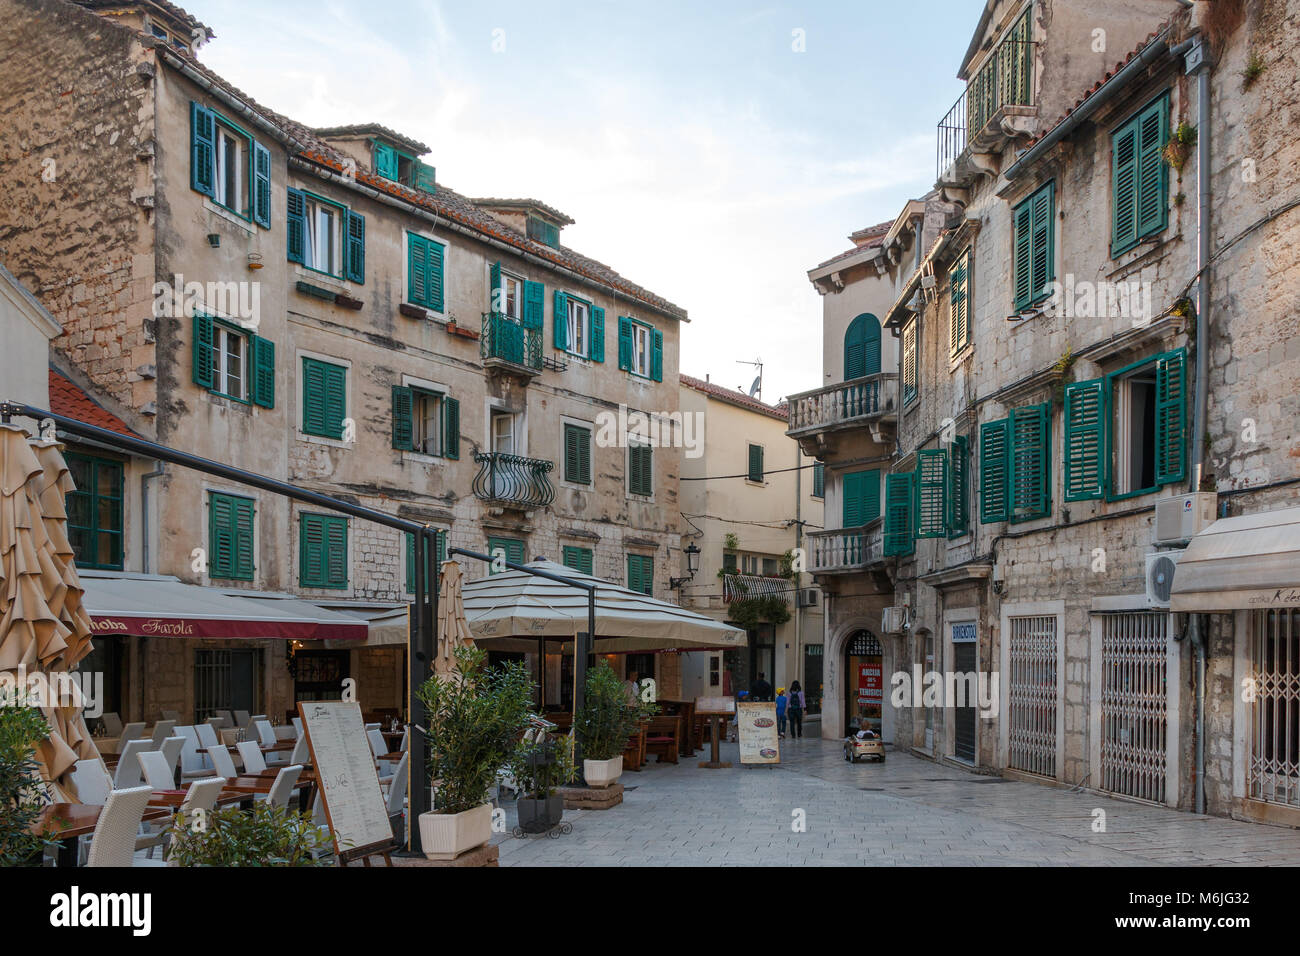 Cafe terraces on a square in the old town of Split during the day Stock Photo